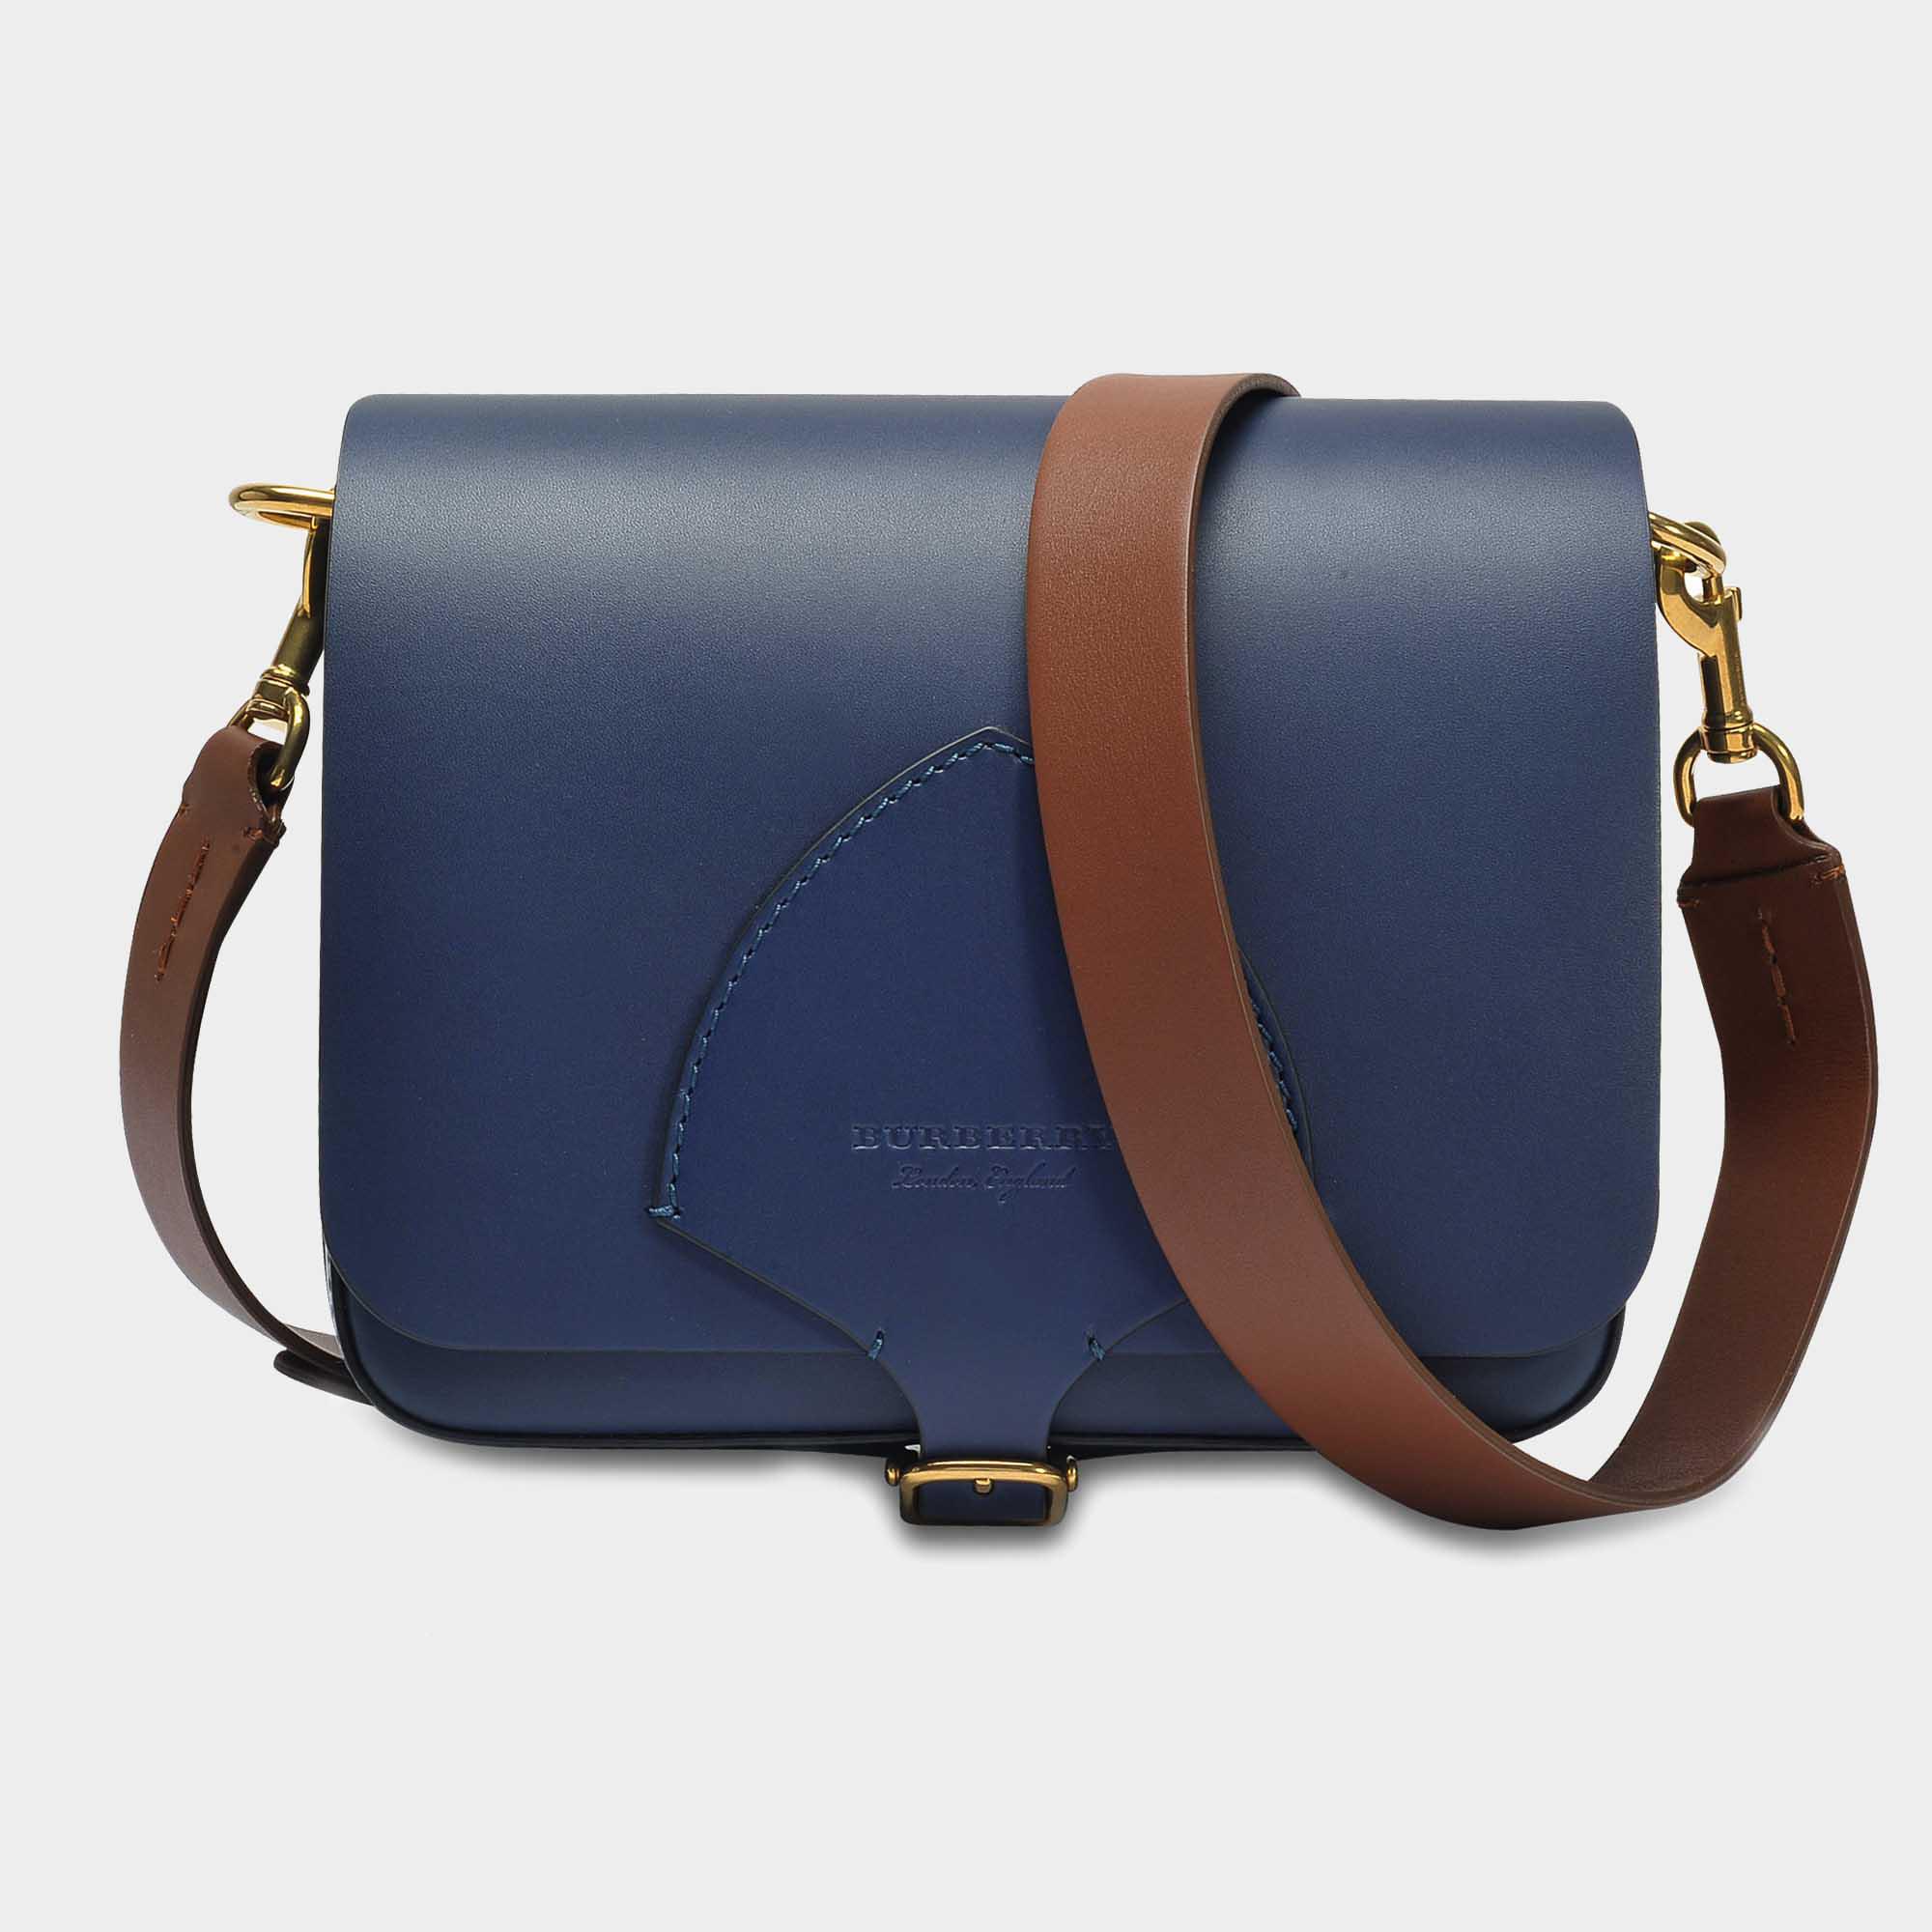 Burberry The Square Satchel Bag In Mid Indigo Soft Leather in Blue | Lyst  Canada